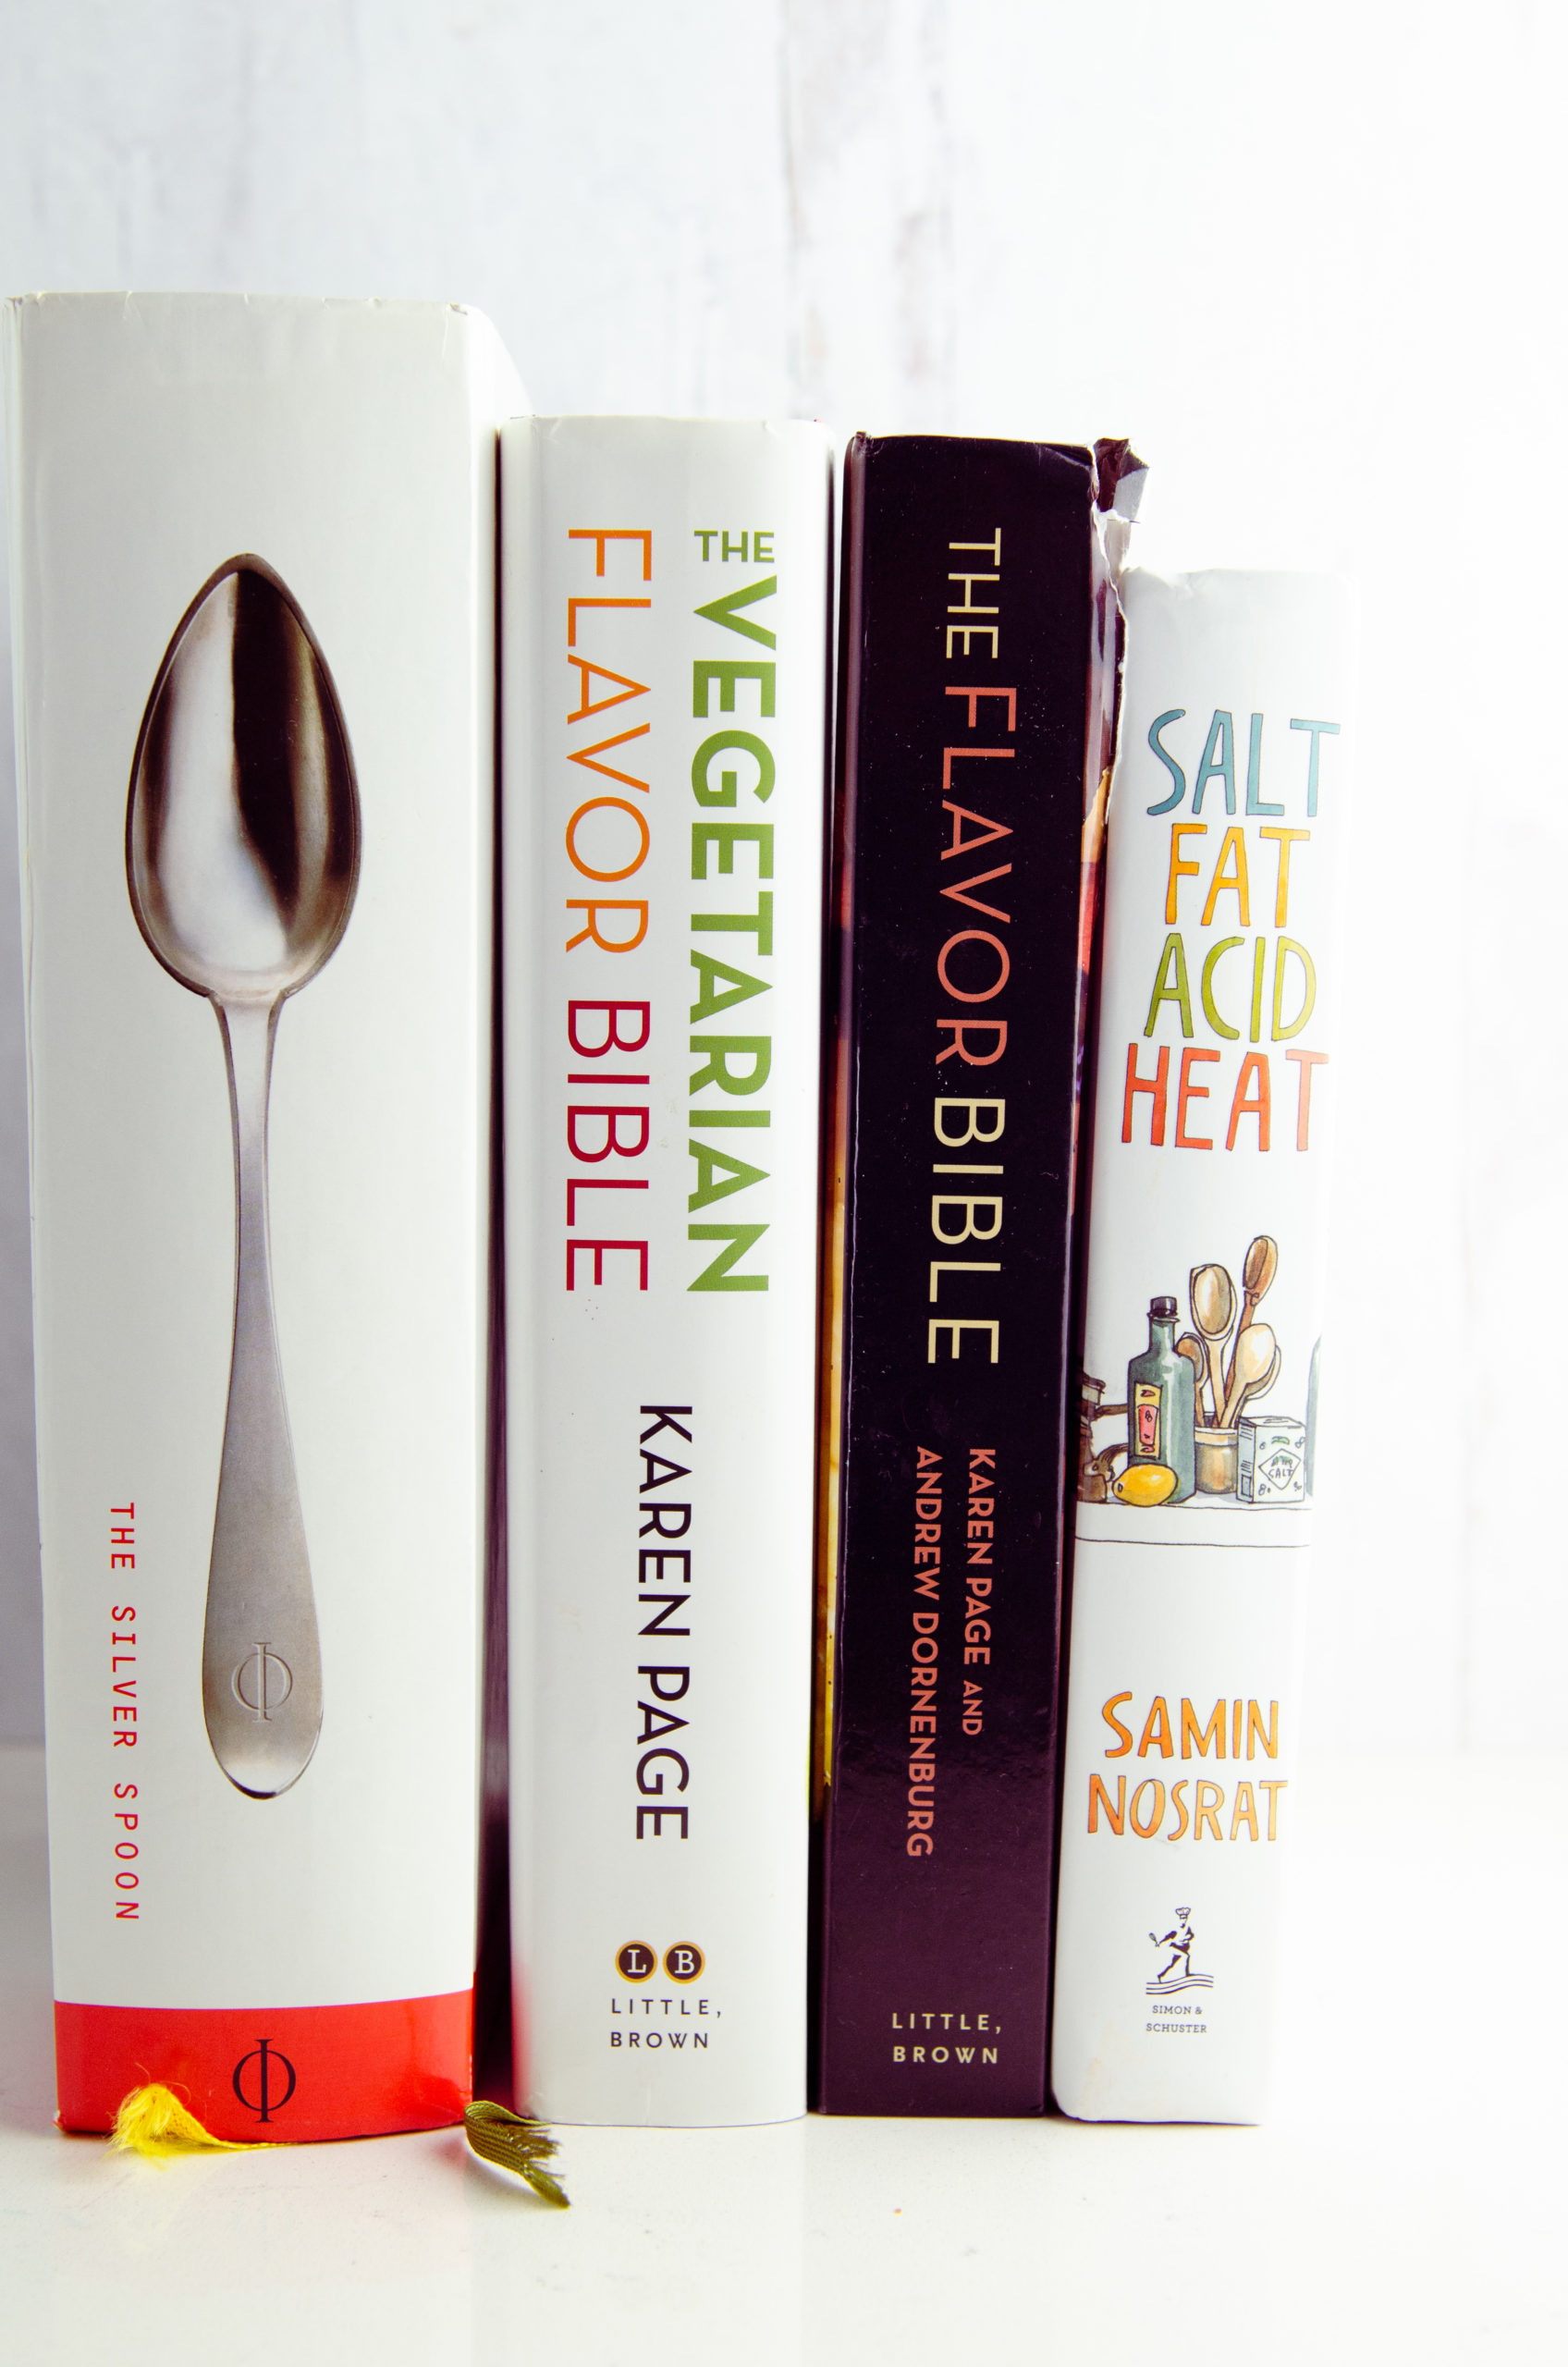 Must have cook books: silver spoon, the vegetarian flavor bible, the flavor bible and salt, fat, acid heat